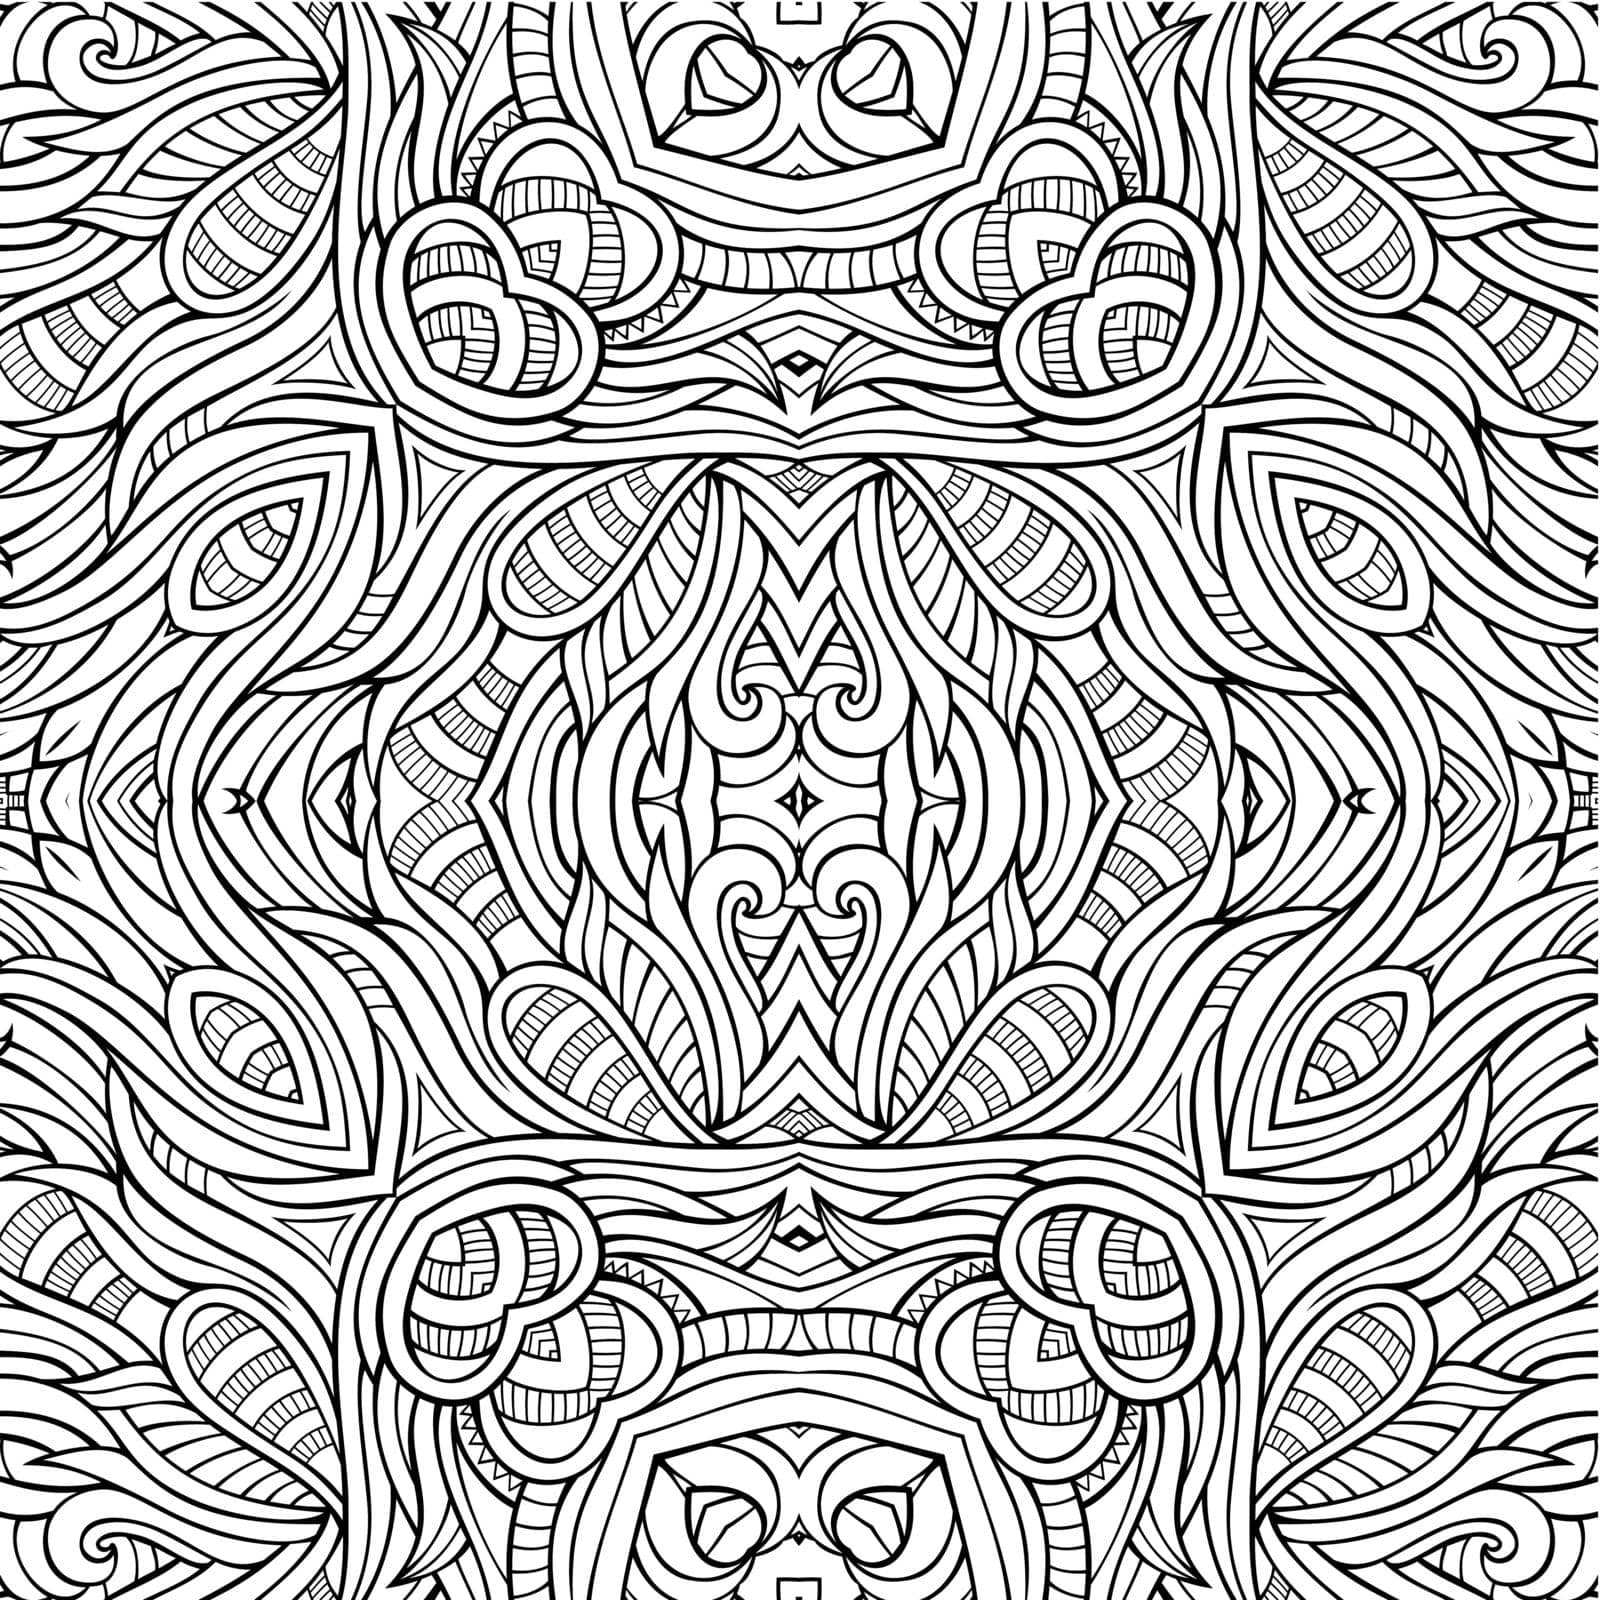 Abstract vector decorative nature ethnic hand drawn pattern by balabolka